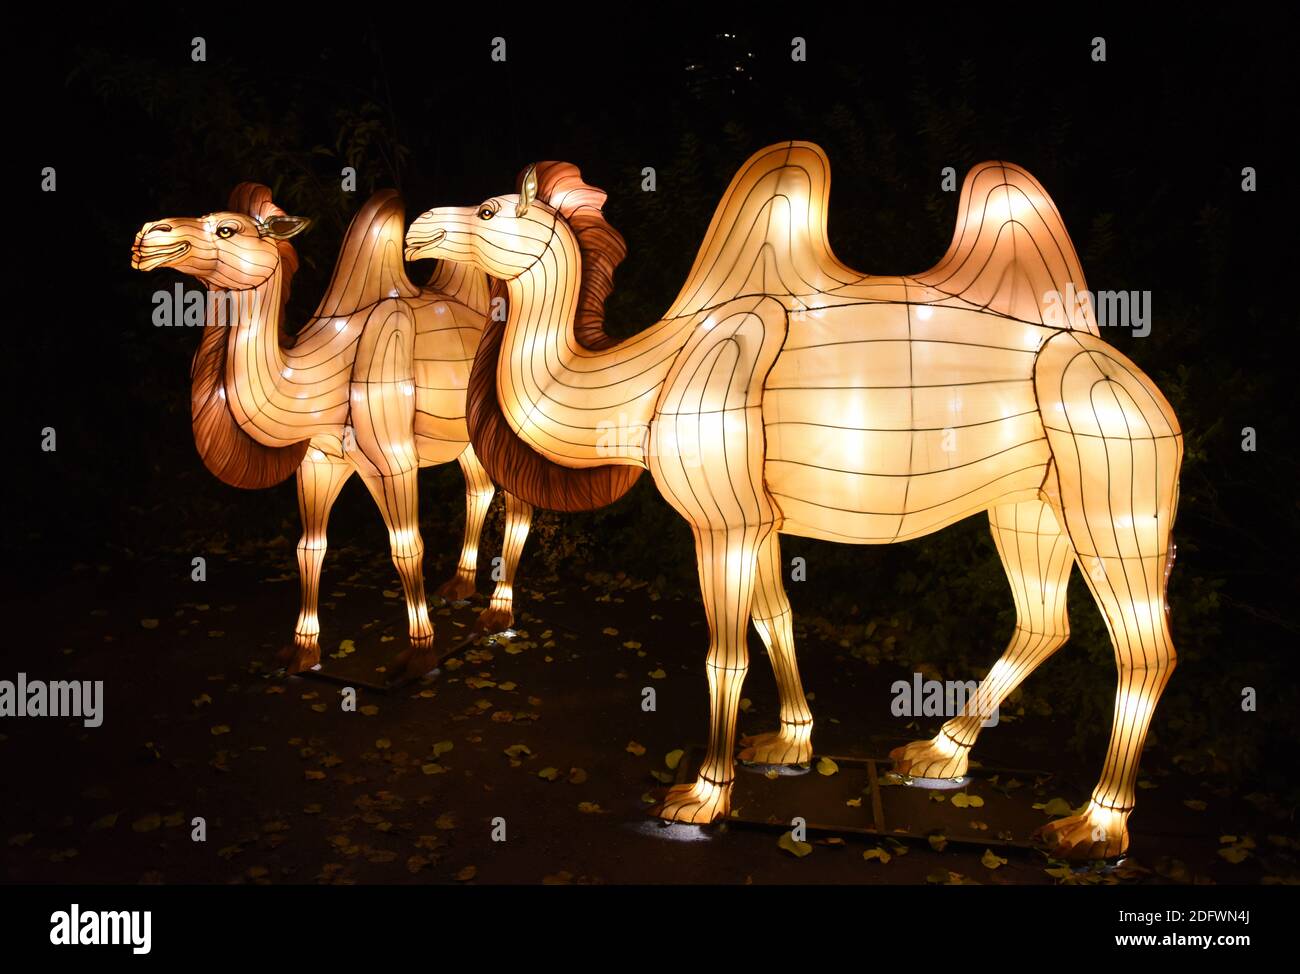 A picture taken on November 29, 2018 shows giant animal shaped light structures displayed at the Jardin des Plantes 'botanical garden' Zoo in Paris, as part of the Light Festival exhibition entitled 'Espèces en voie d'illumination' which runs from November 16, 2018 to January 15, 2019. Photo by Alain Apaydin/ABACAPRESS.COM Stock Photo